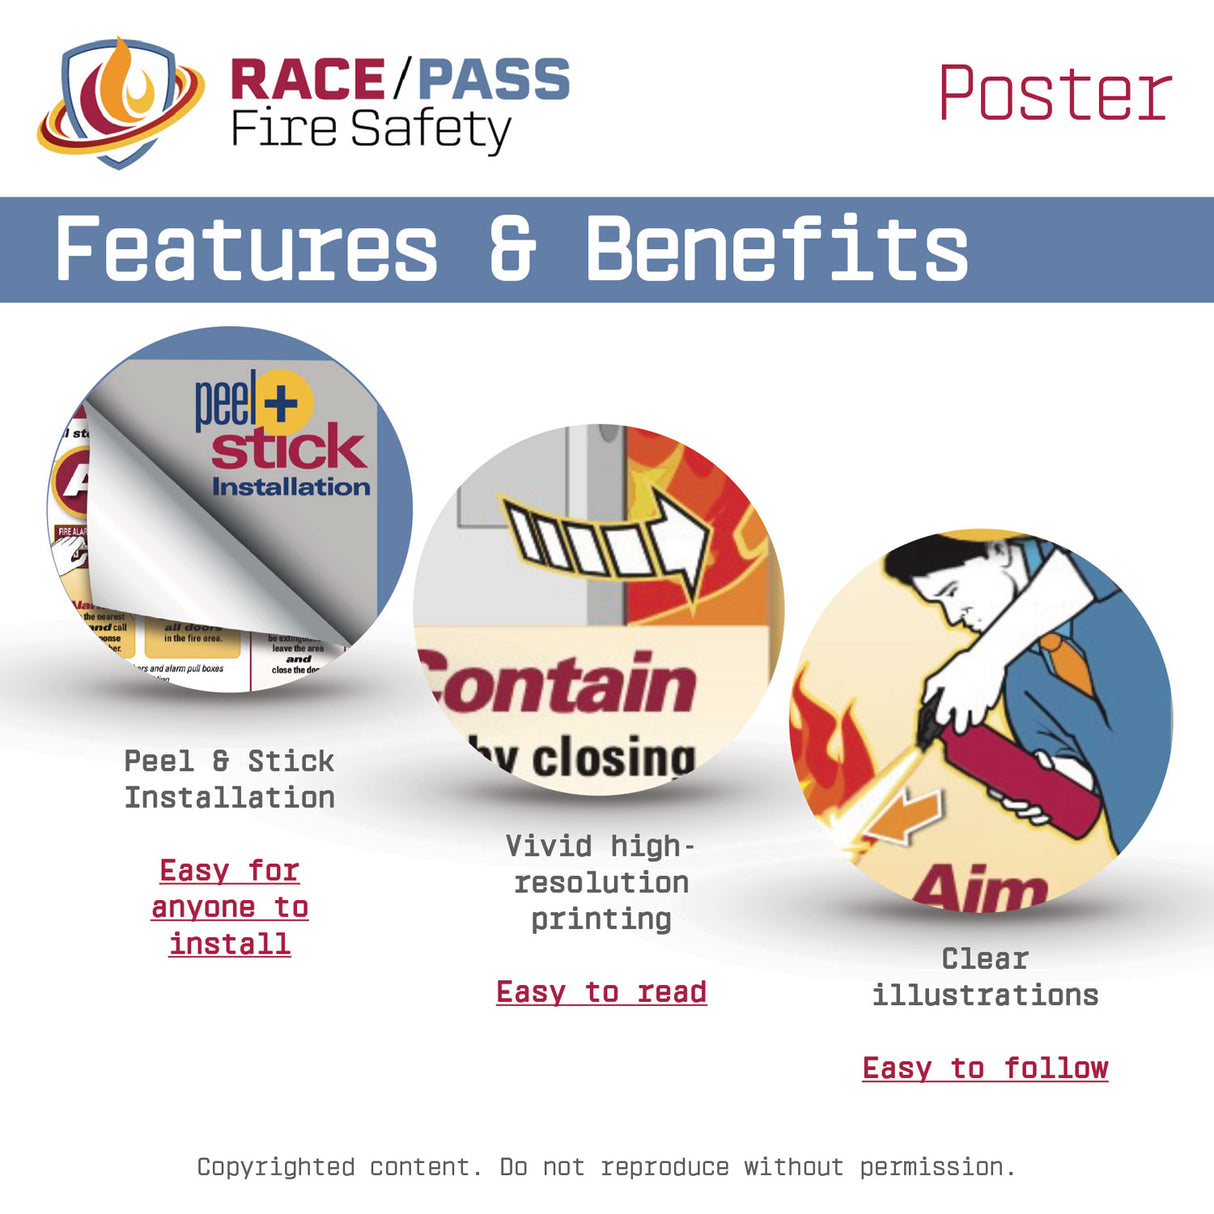 RACE/PASS Fire Safety Poster features and benefits. Peel & stick installation = easy for anyone to install.  Vivid high-resolution printing = easy to read.  Clear illustrations = easy to follow.